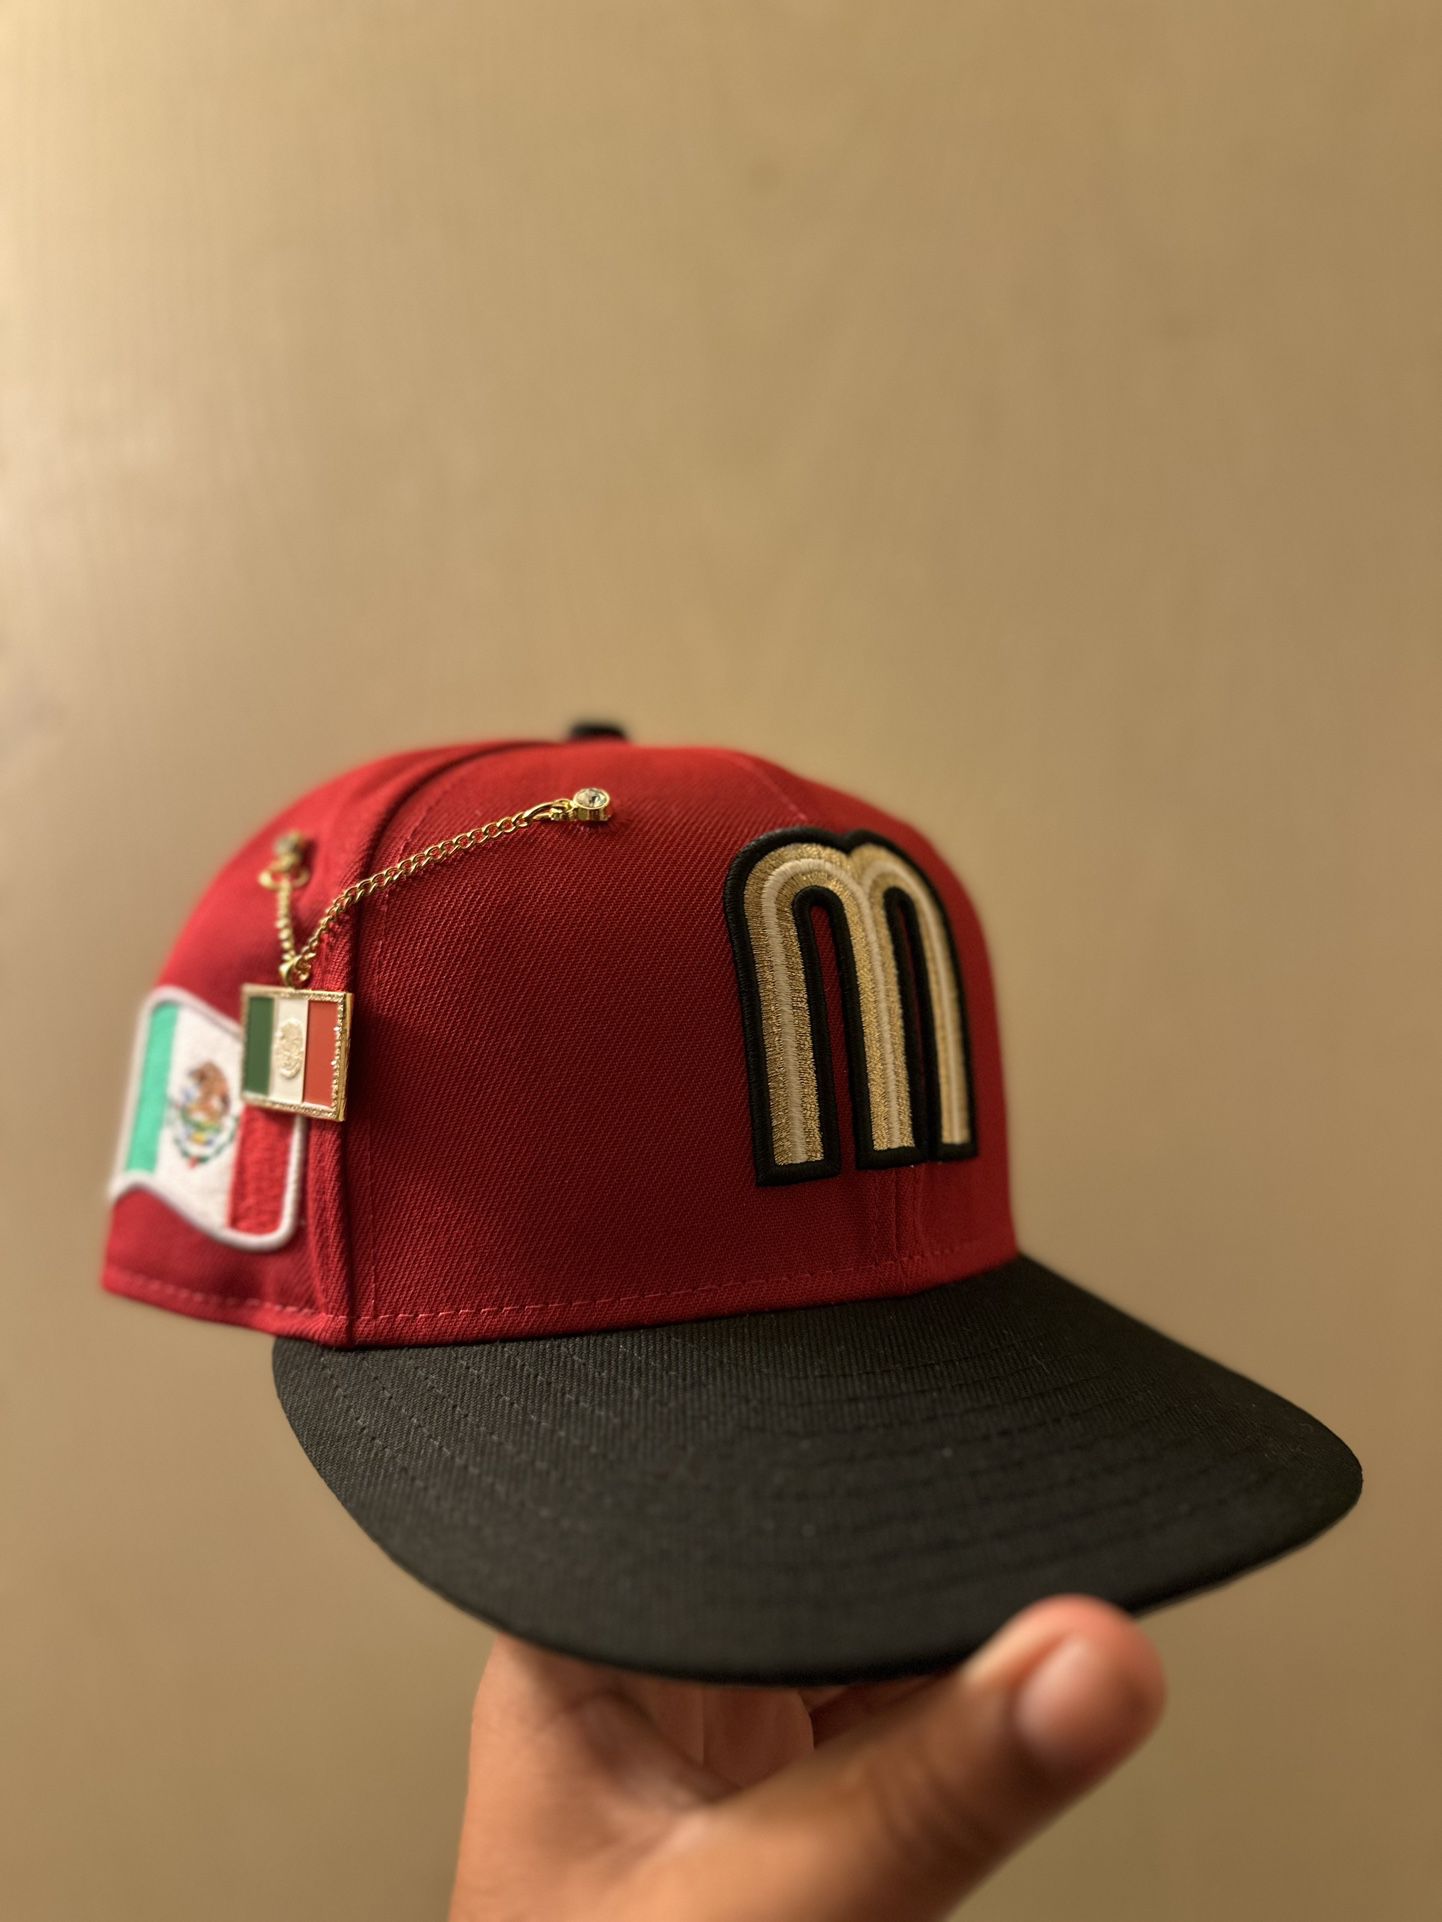 New Era Mexico Fitted Hat